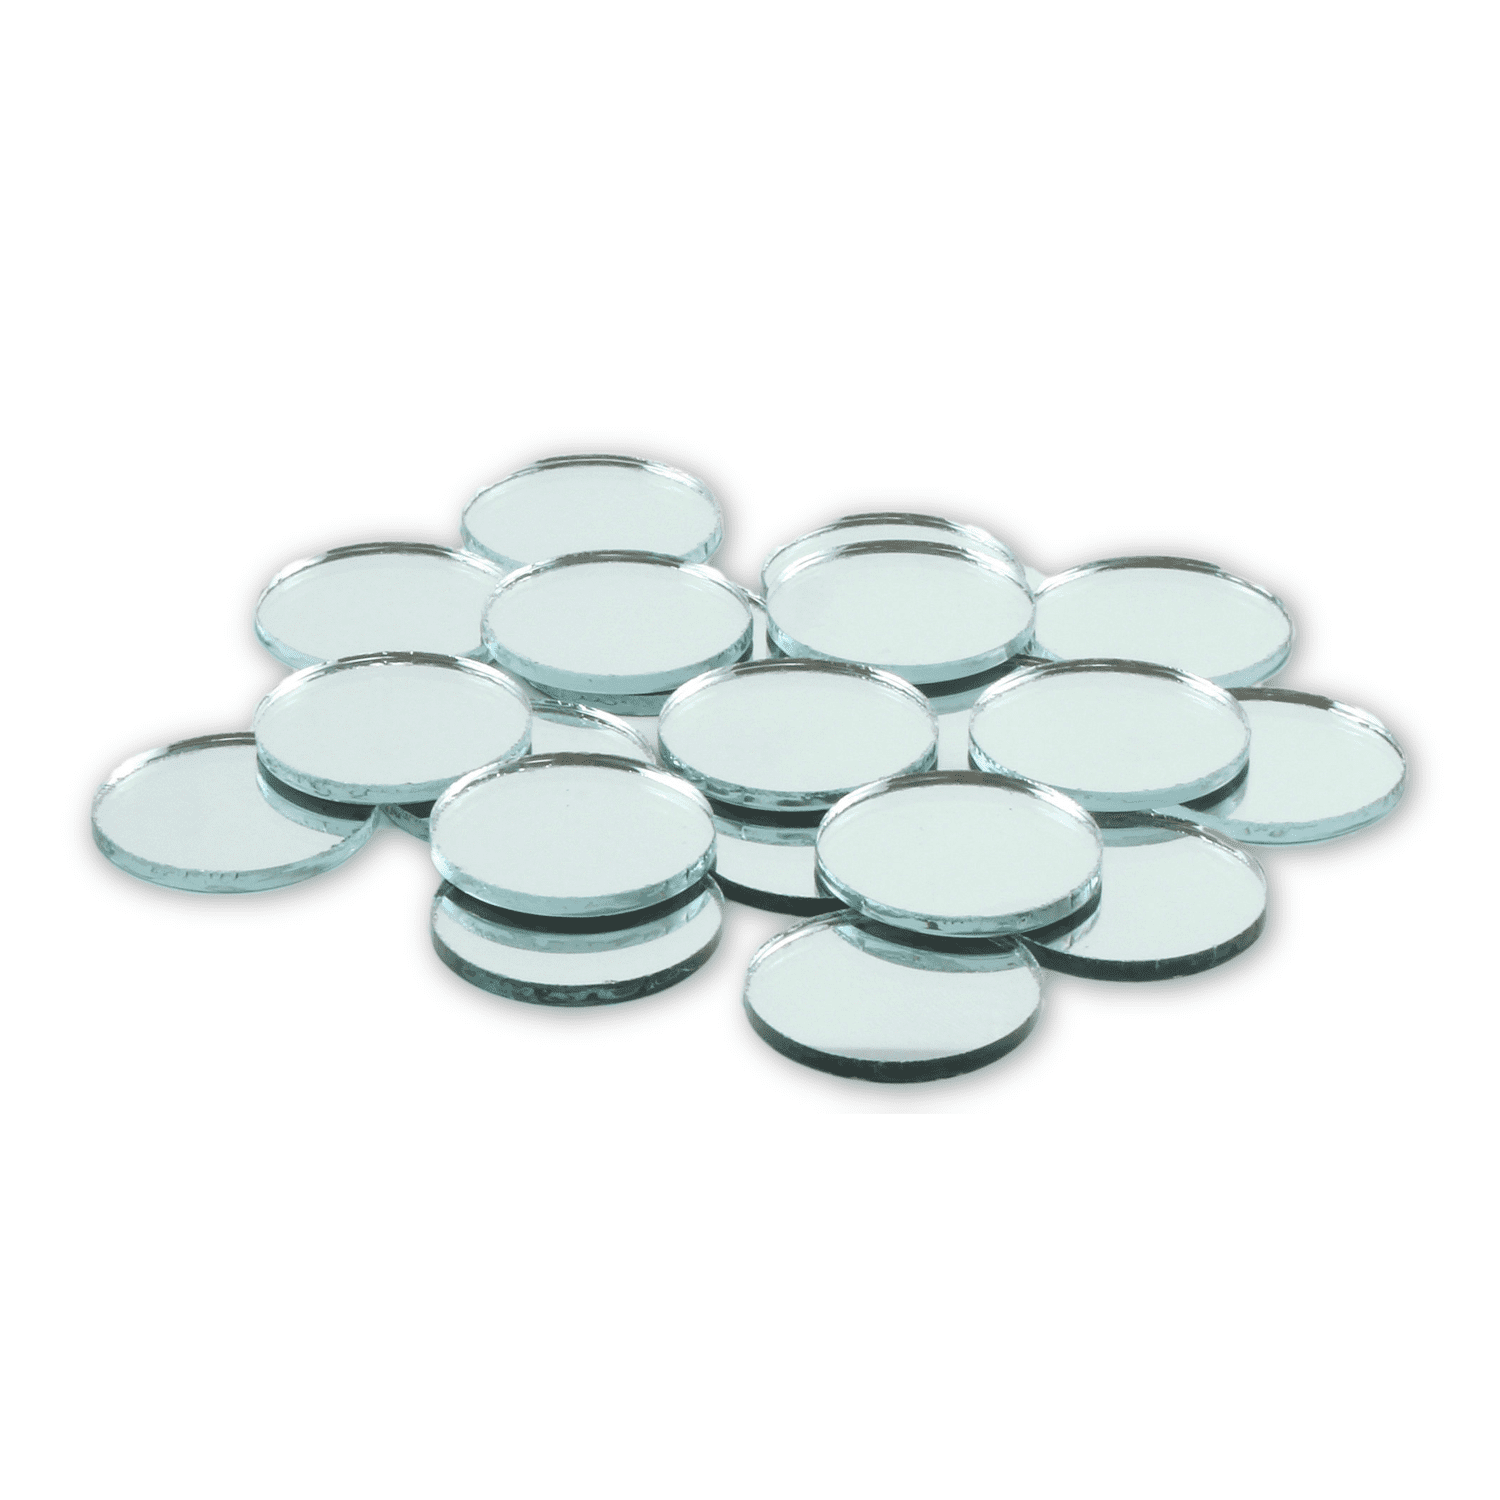 50 Pieces Decoration Traveling Framing Mini 1 Inch Small Round Glass Mirror Circles for Arts & Crafts Projects